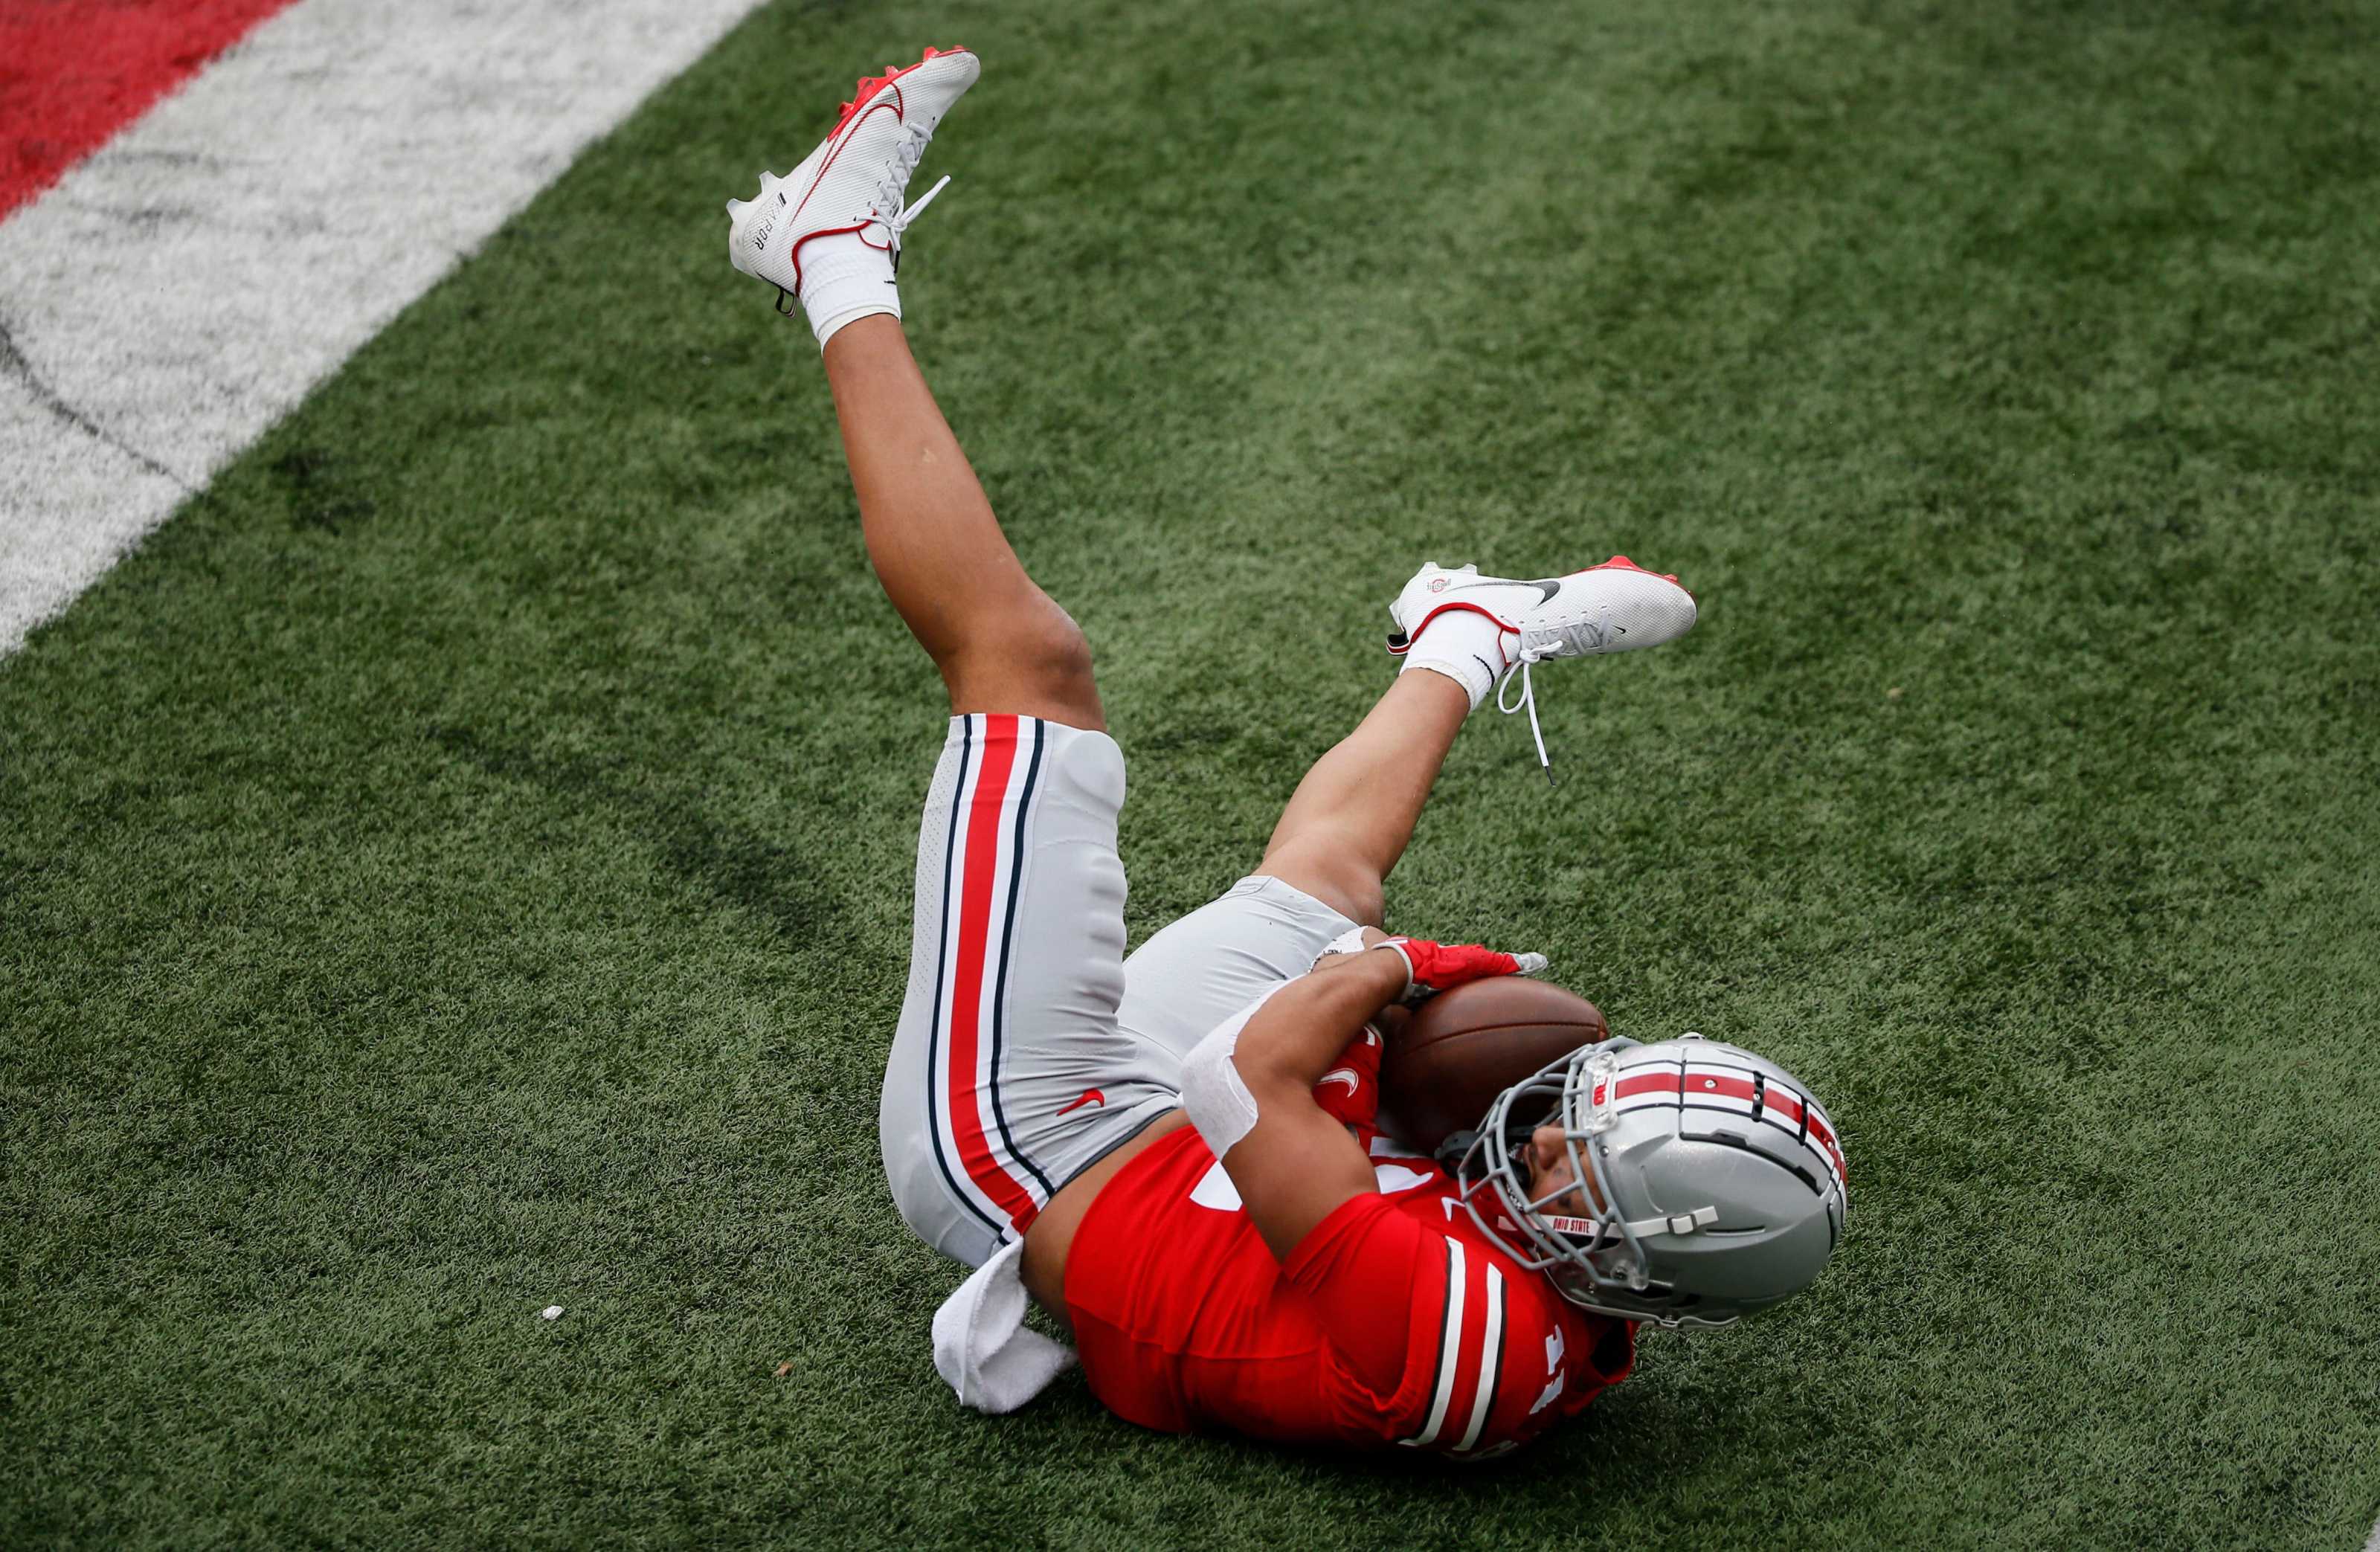 Ohio State freshman Jaxon Smith-Njigba might have the catch of the year